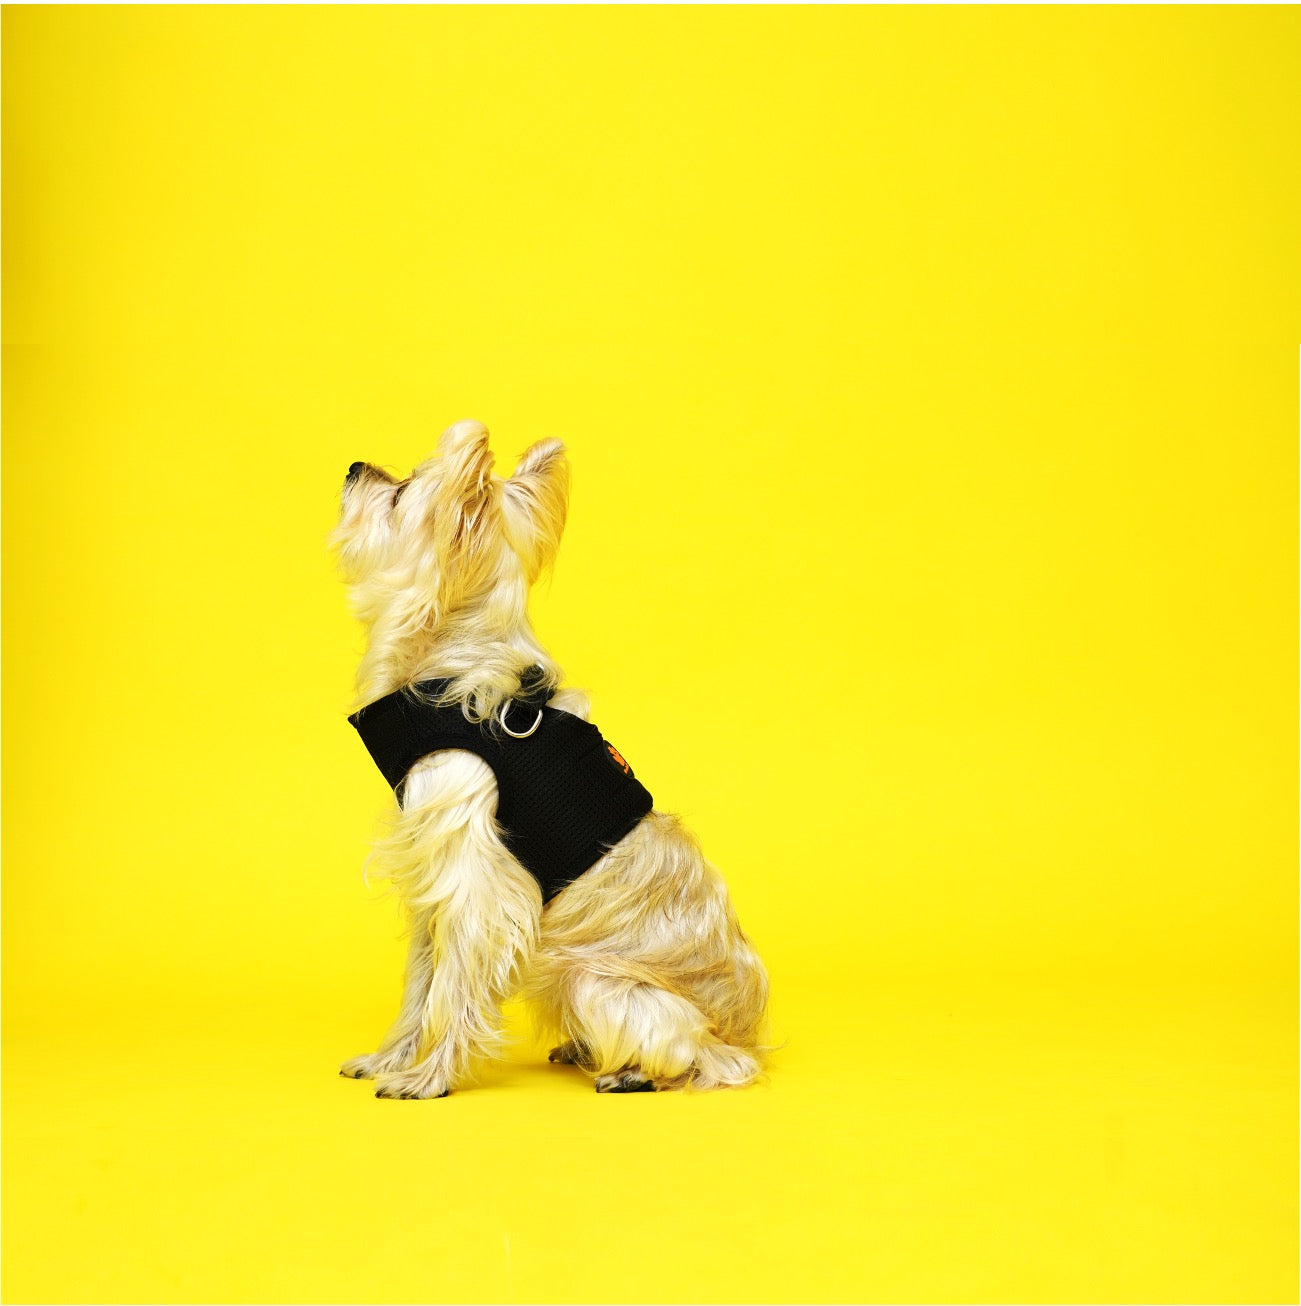 Hug-A-Dog Harness In Fabric & Mesh, Our Popular Mesh-Based Harness Gets  Fashionable With A Solid Fabric Overlay